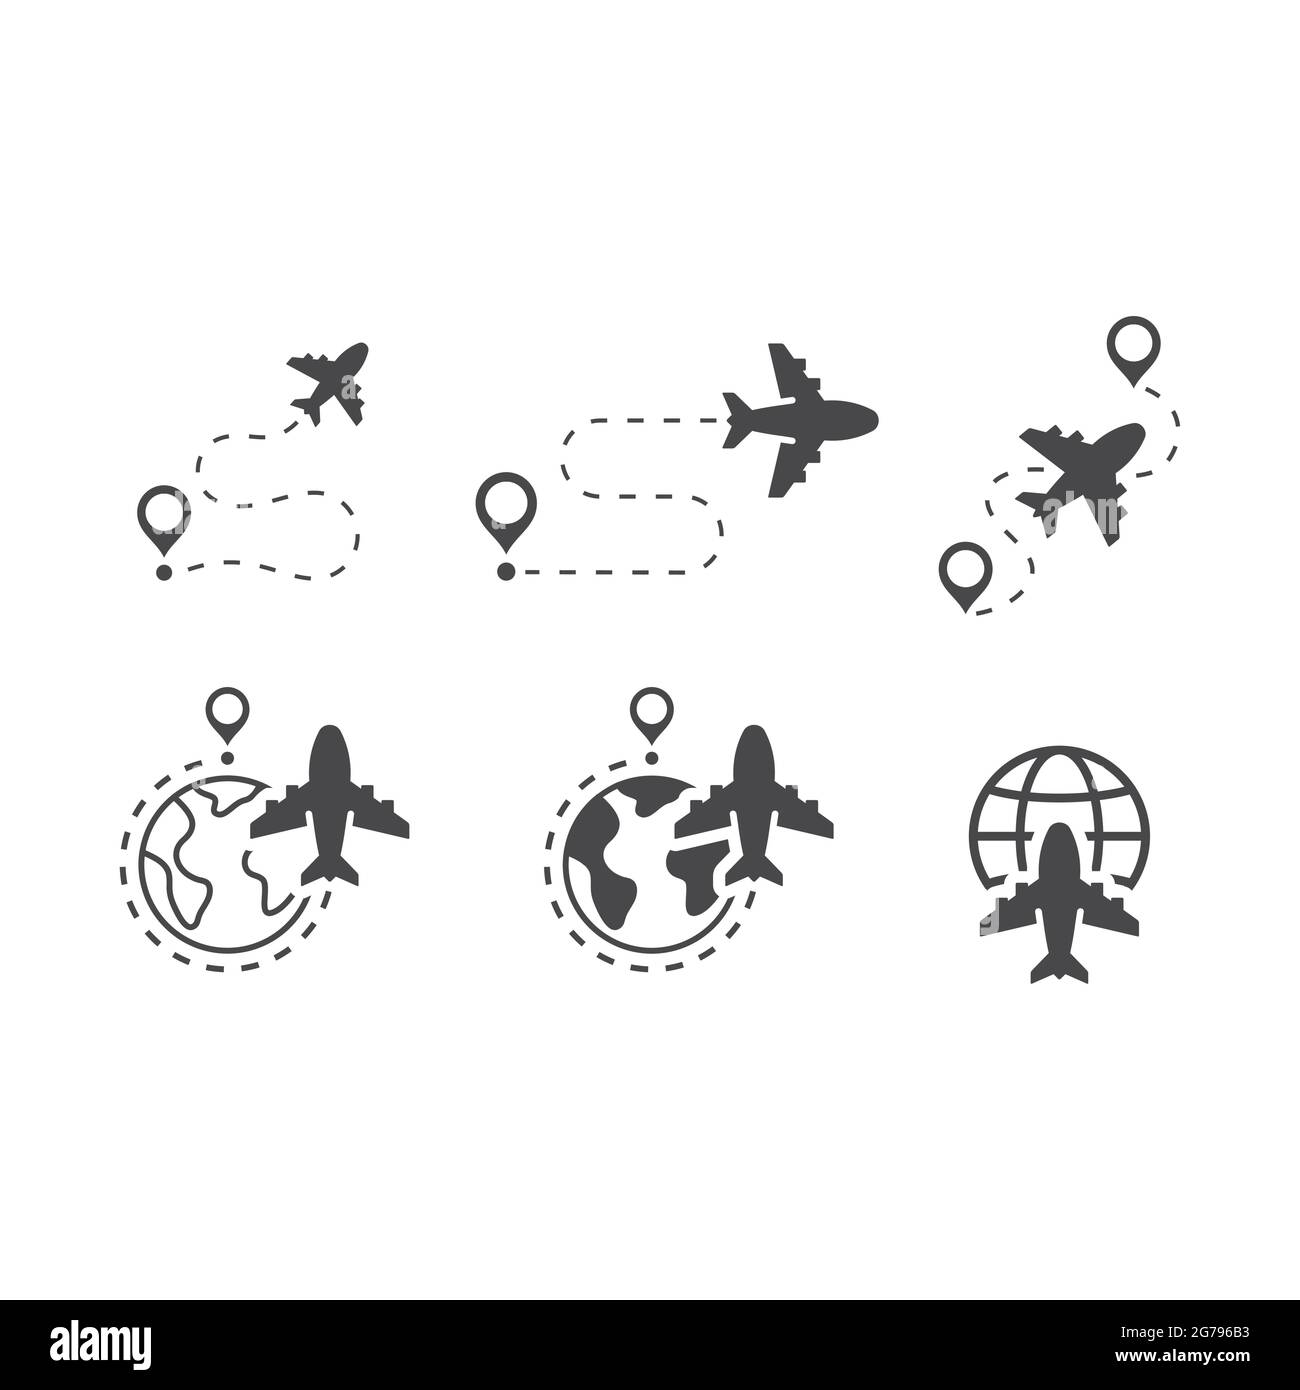 Airplane, globe and location pin vector icon set. Flight dashed line route, commercial airplane flying symbols. Stock Vector